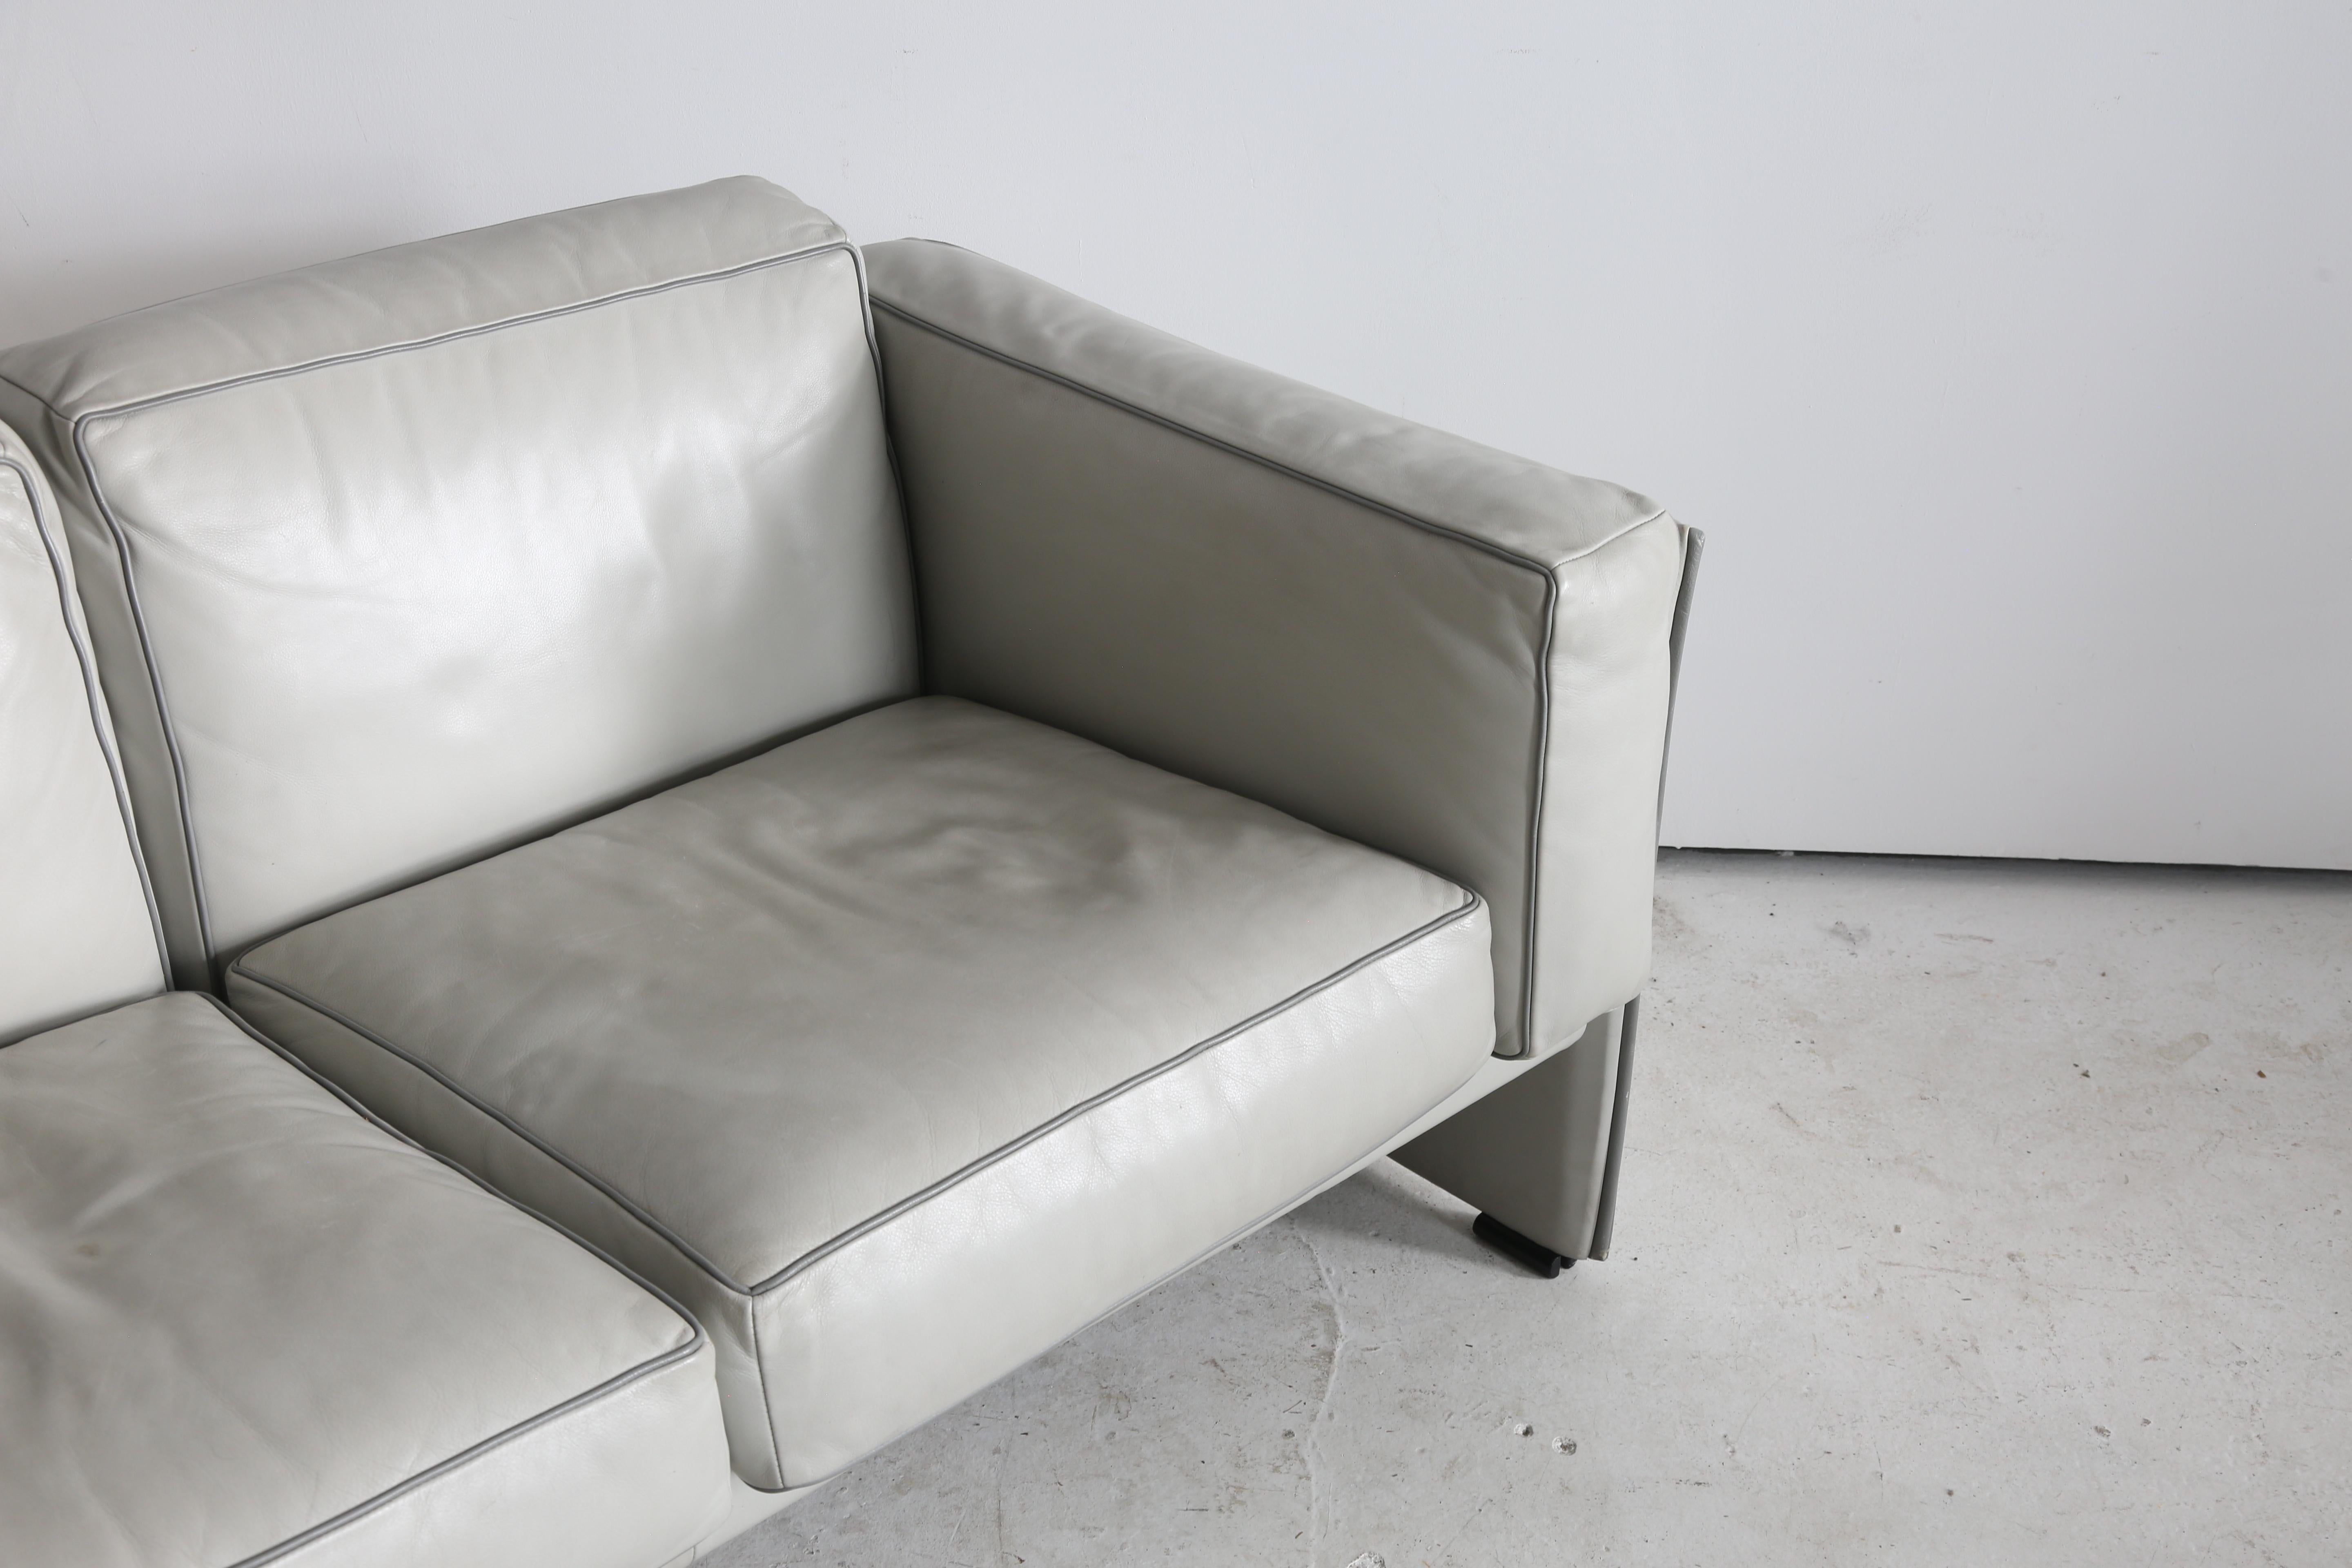 Original ‘Duc 405’ sofa designed by Mario Bellini for Cassina. 

First issued in the mid-1970s, this sofa dates from the mid-1990s.

Super quality Italian leather two-seater. With some light wear, consistent with careful use, see close up photos.

W